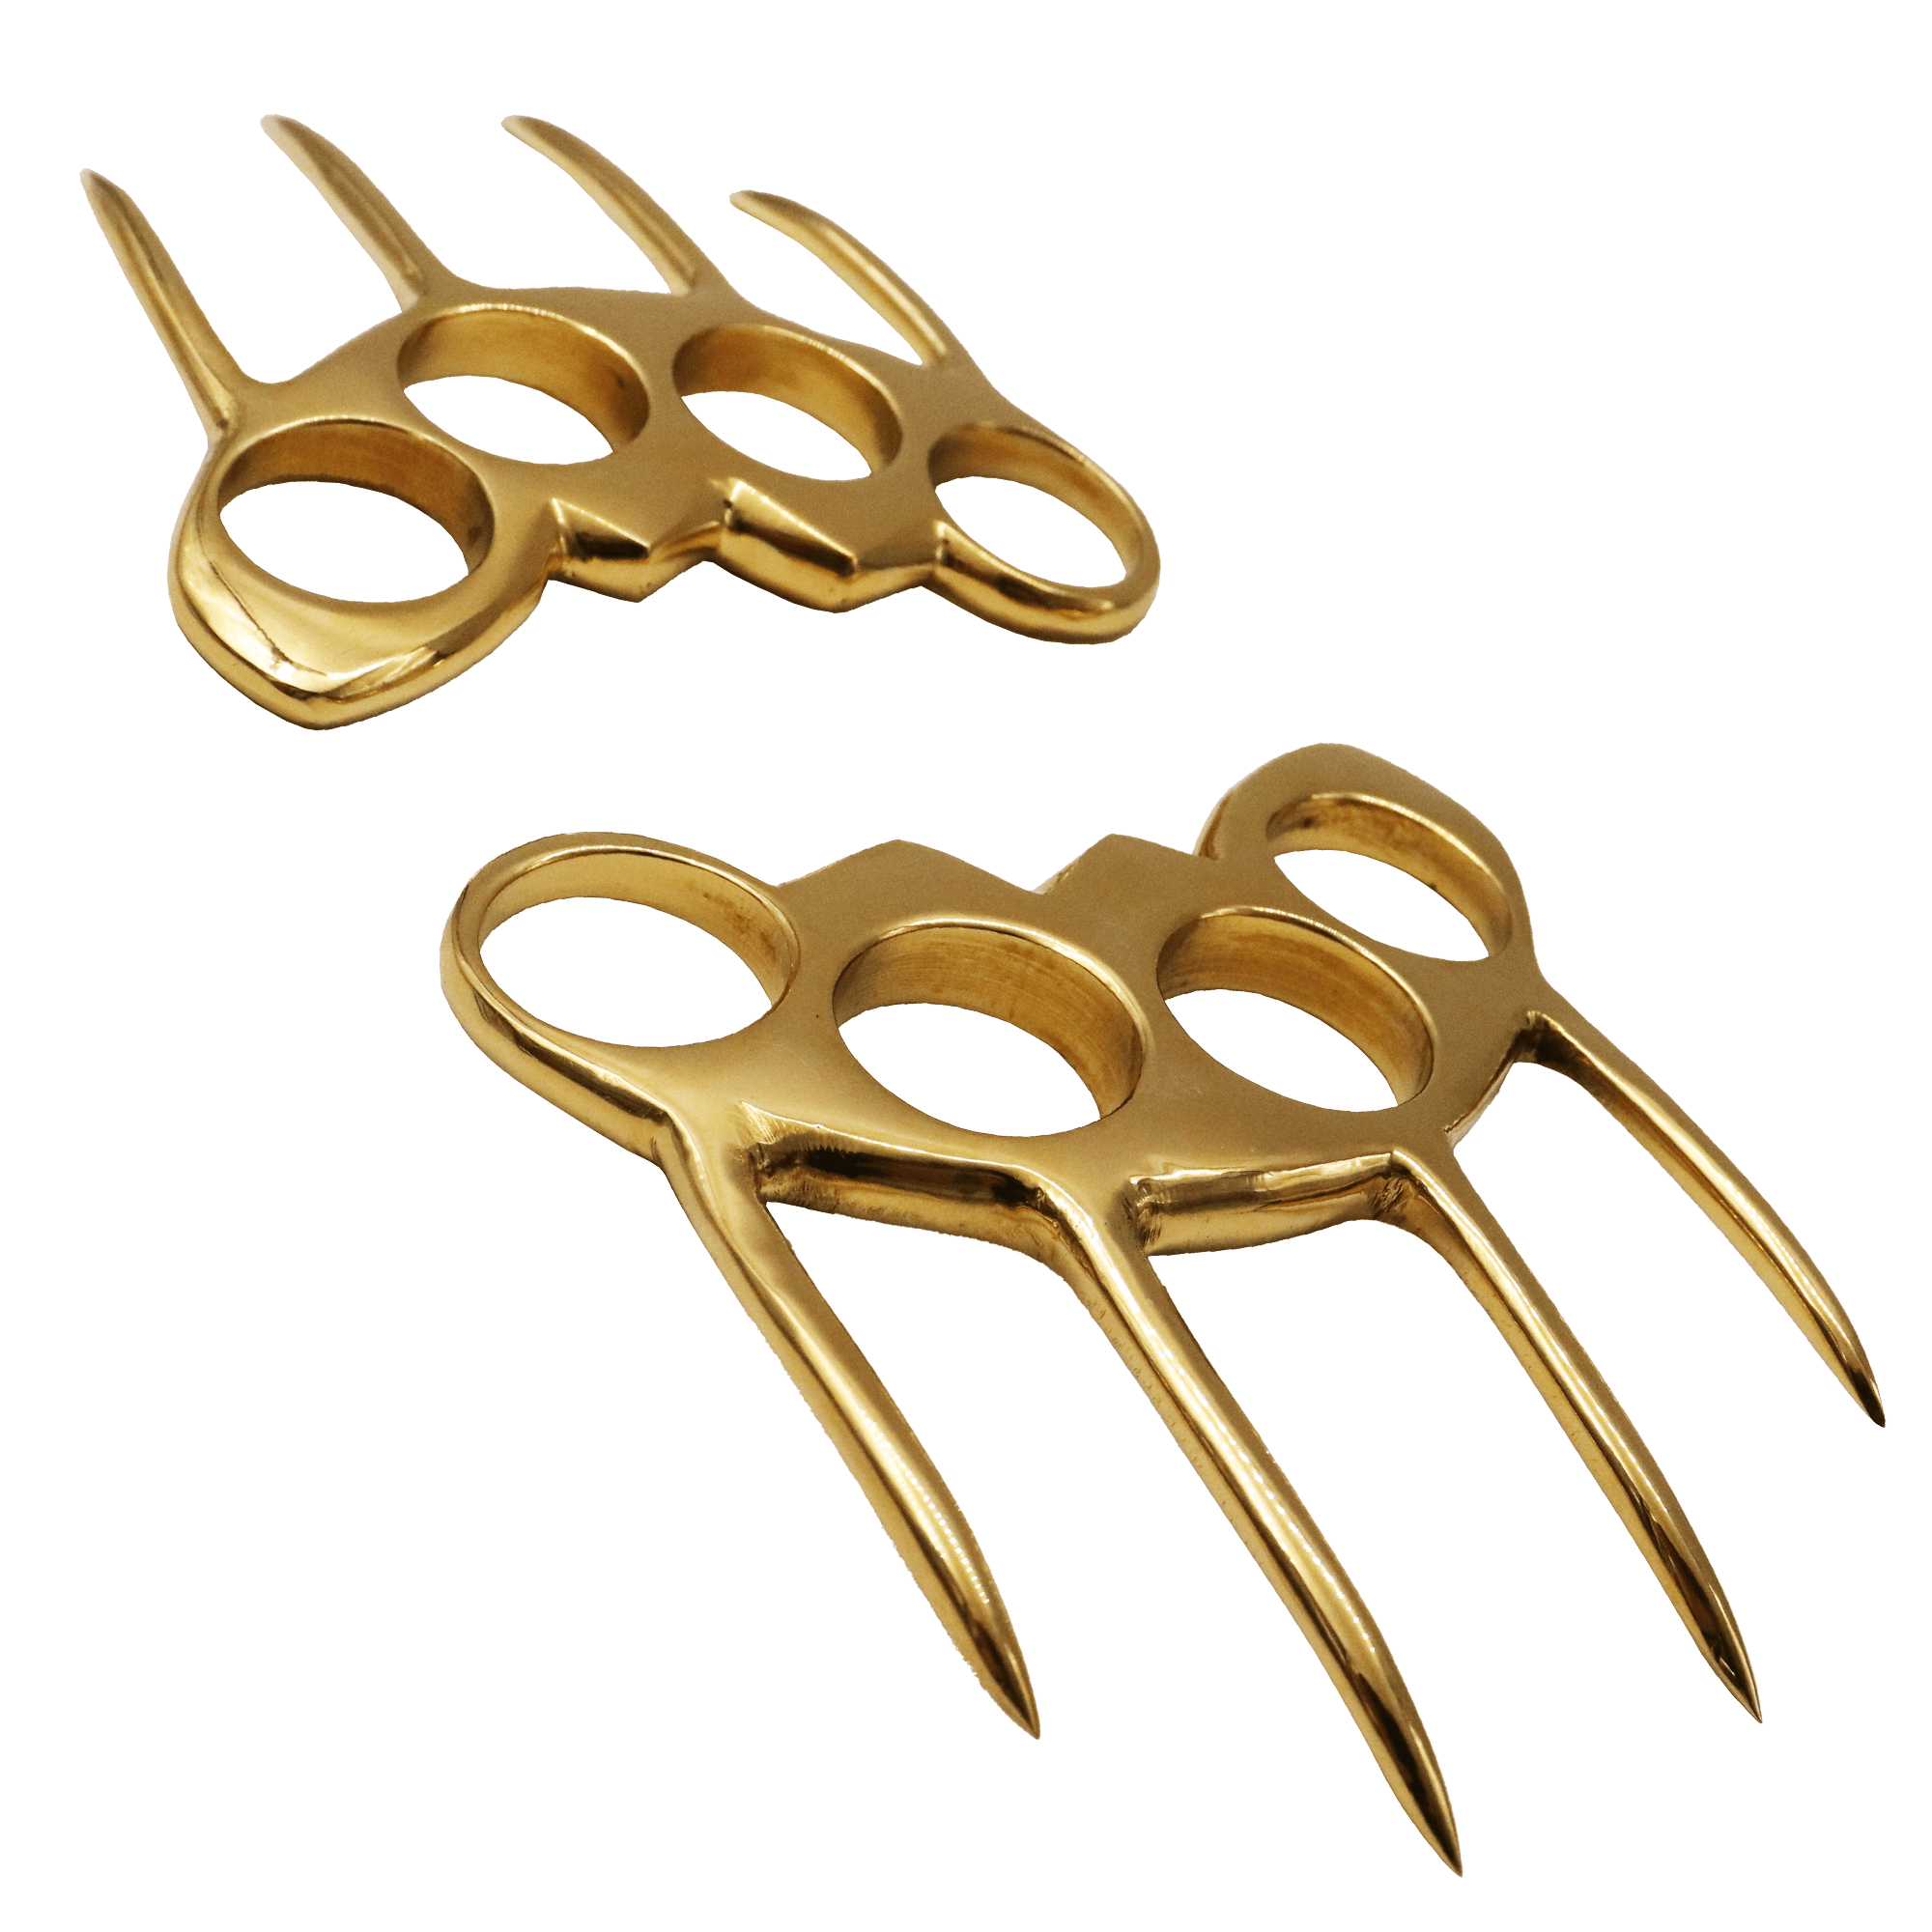 Scorpion Hunter Knuckles - Spiked Knuckle Duster - Scorpion Brass Knuckles